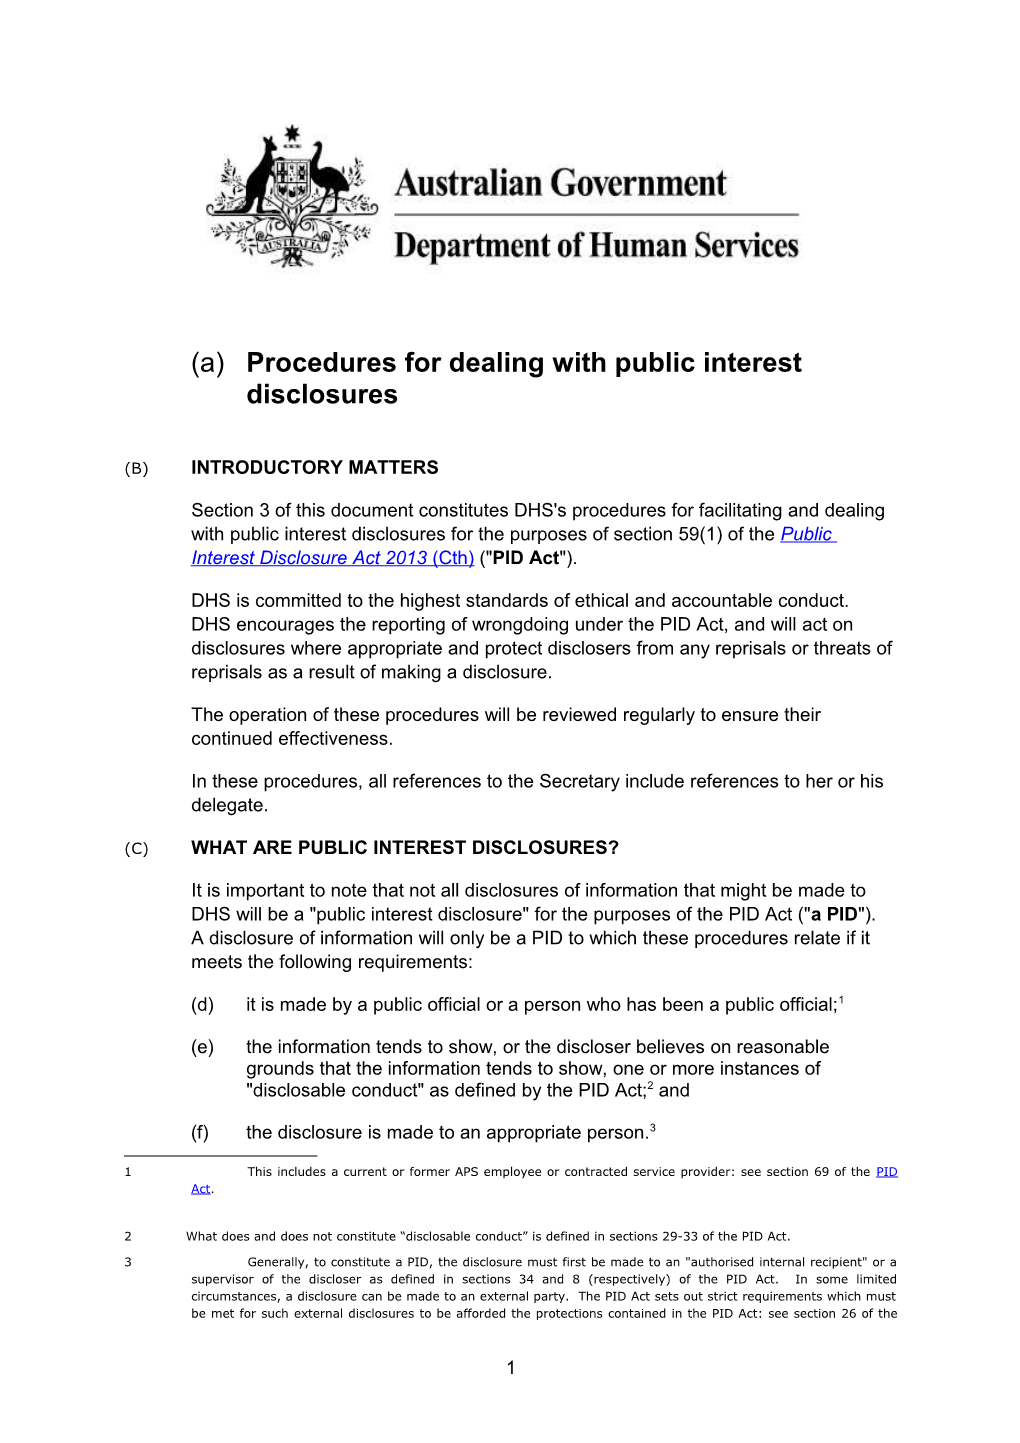 Procedures for Dealing with Public Interest Disclosures